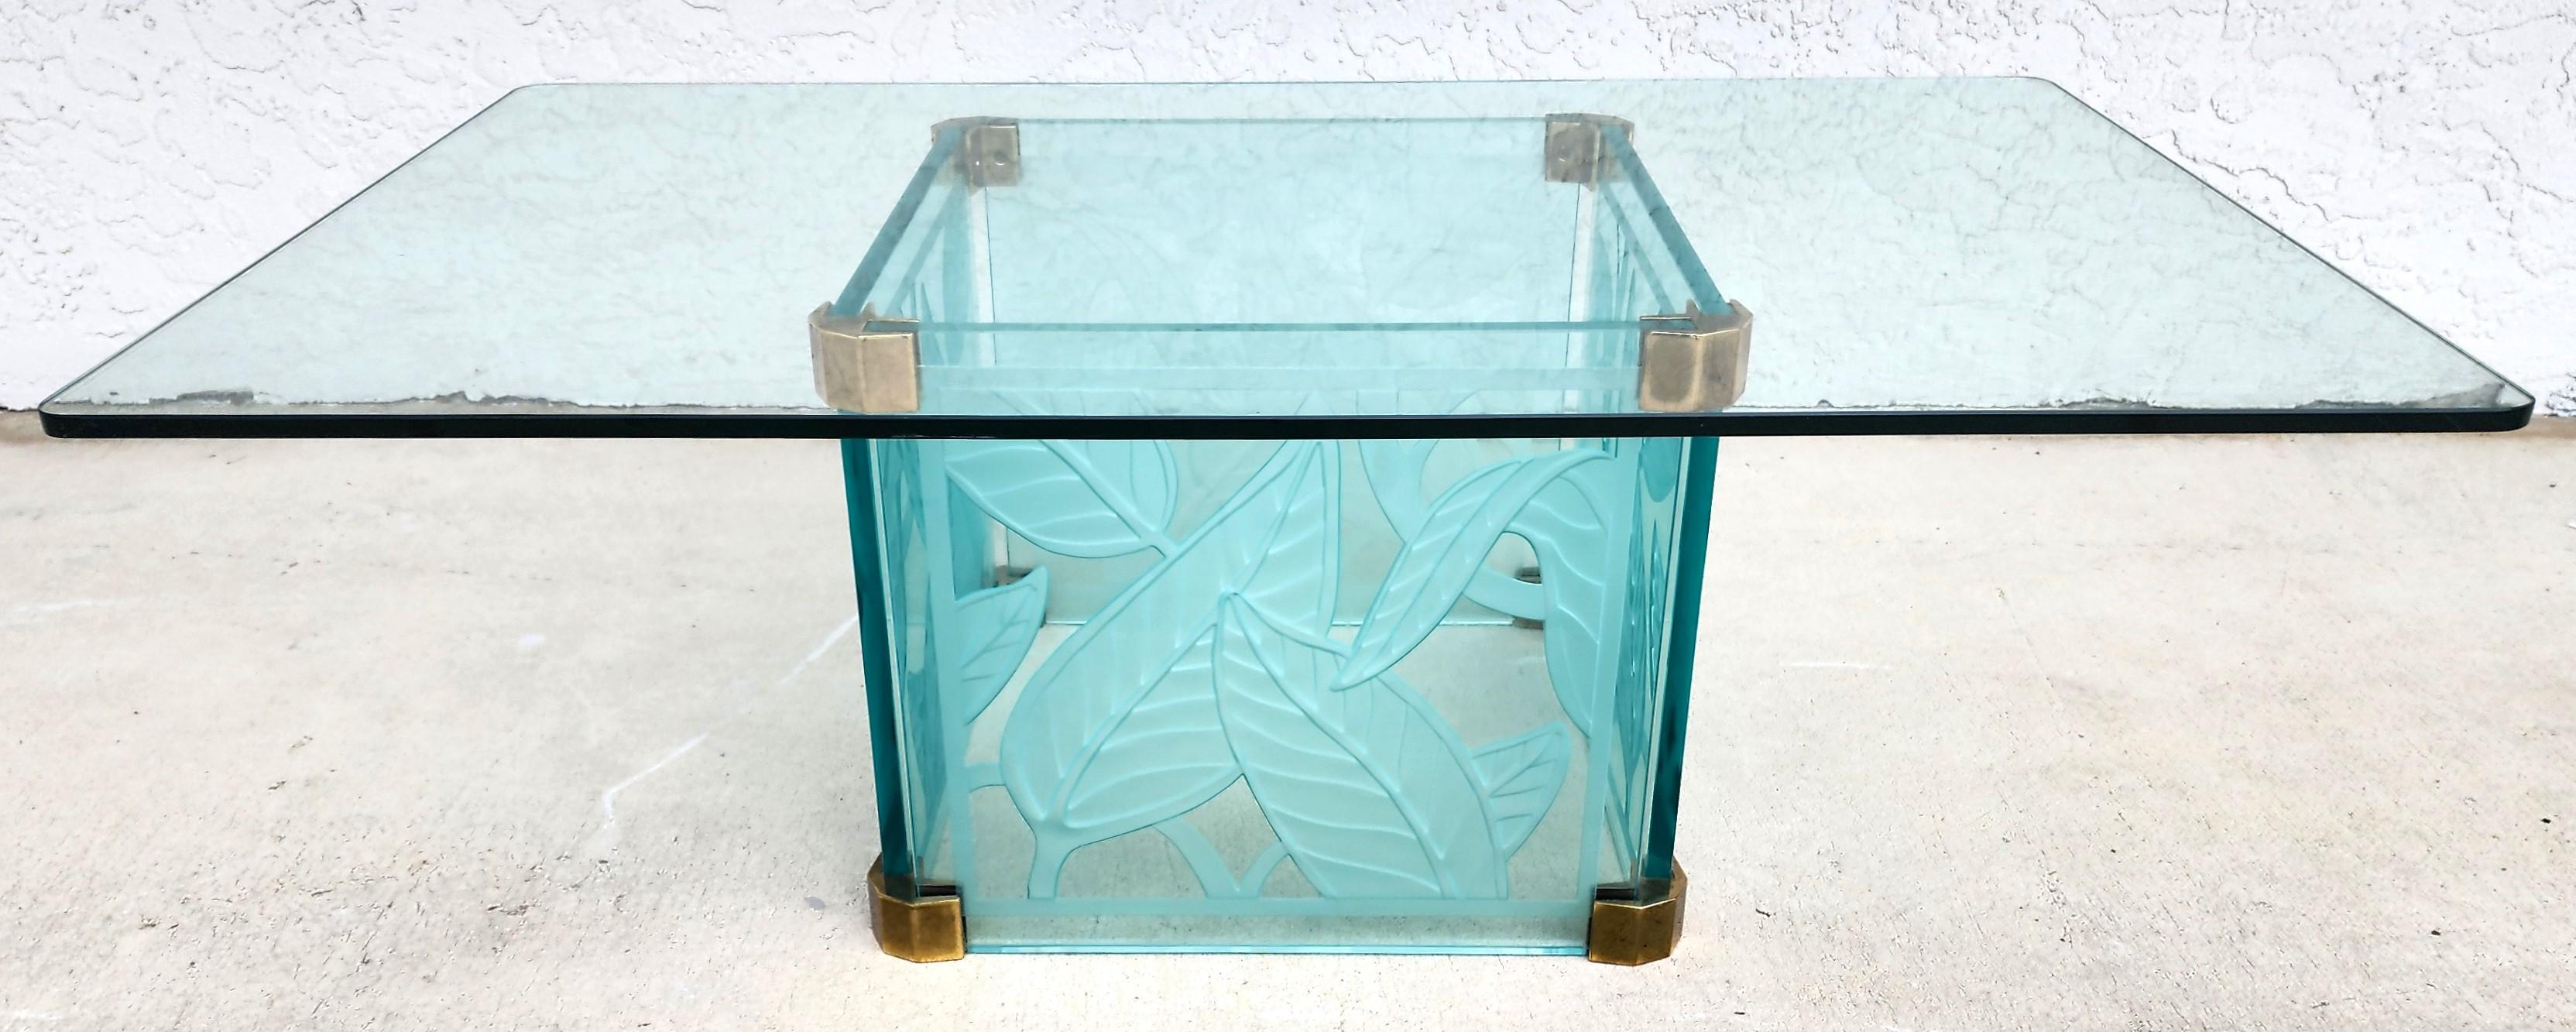 etched glass table top